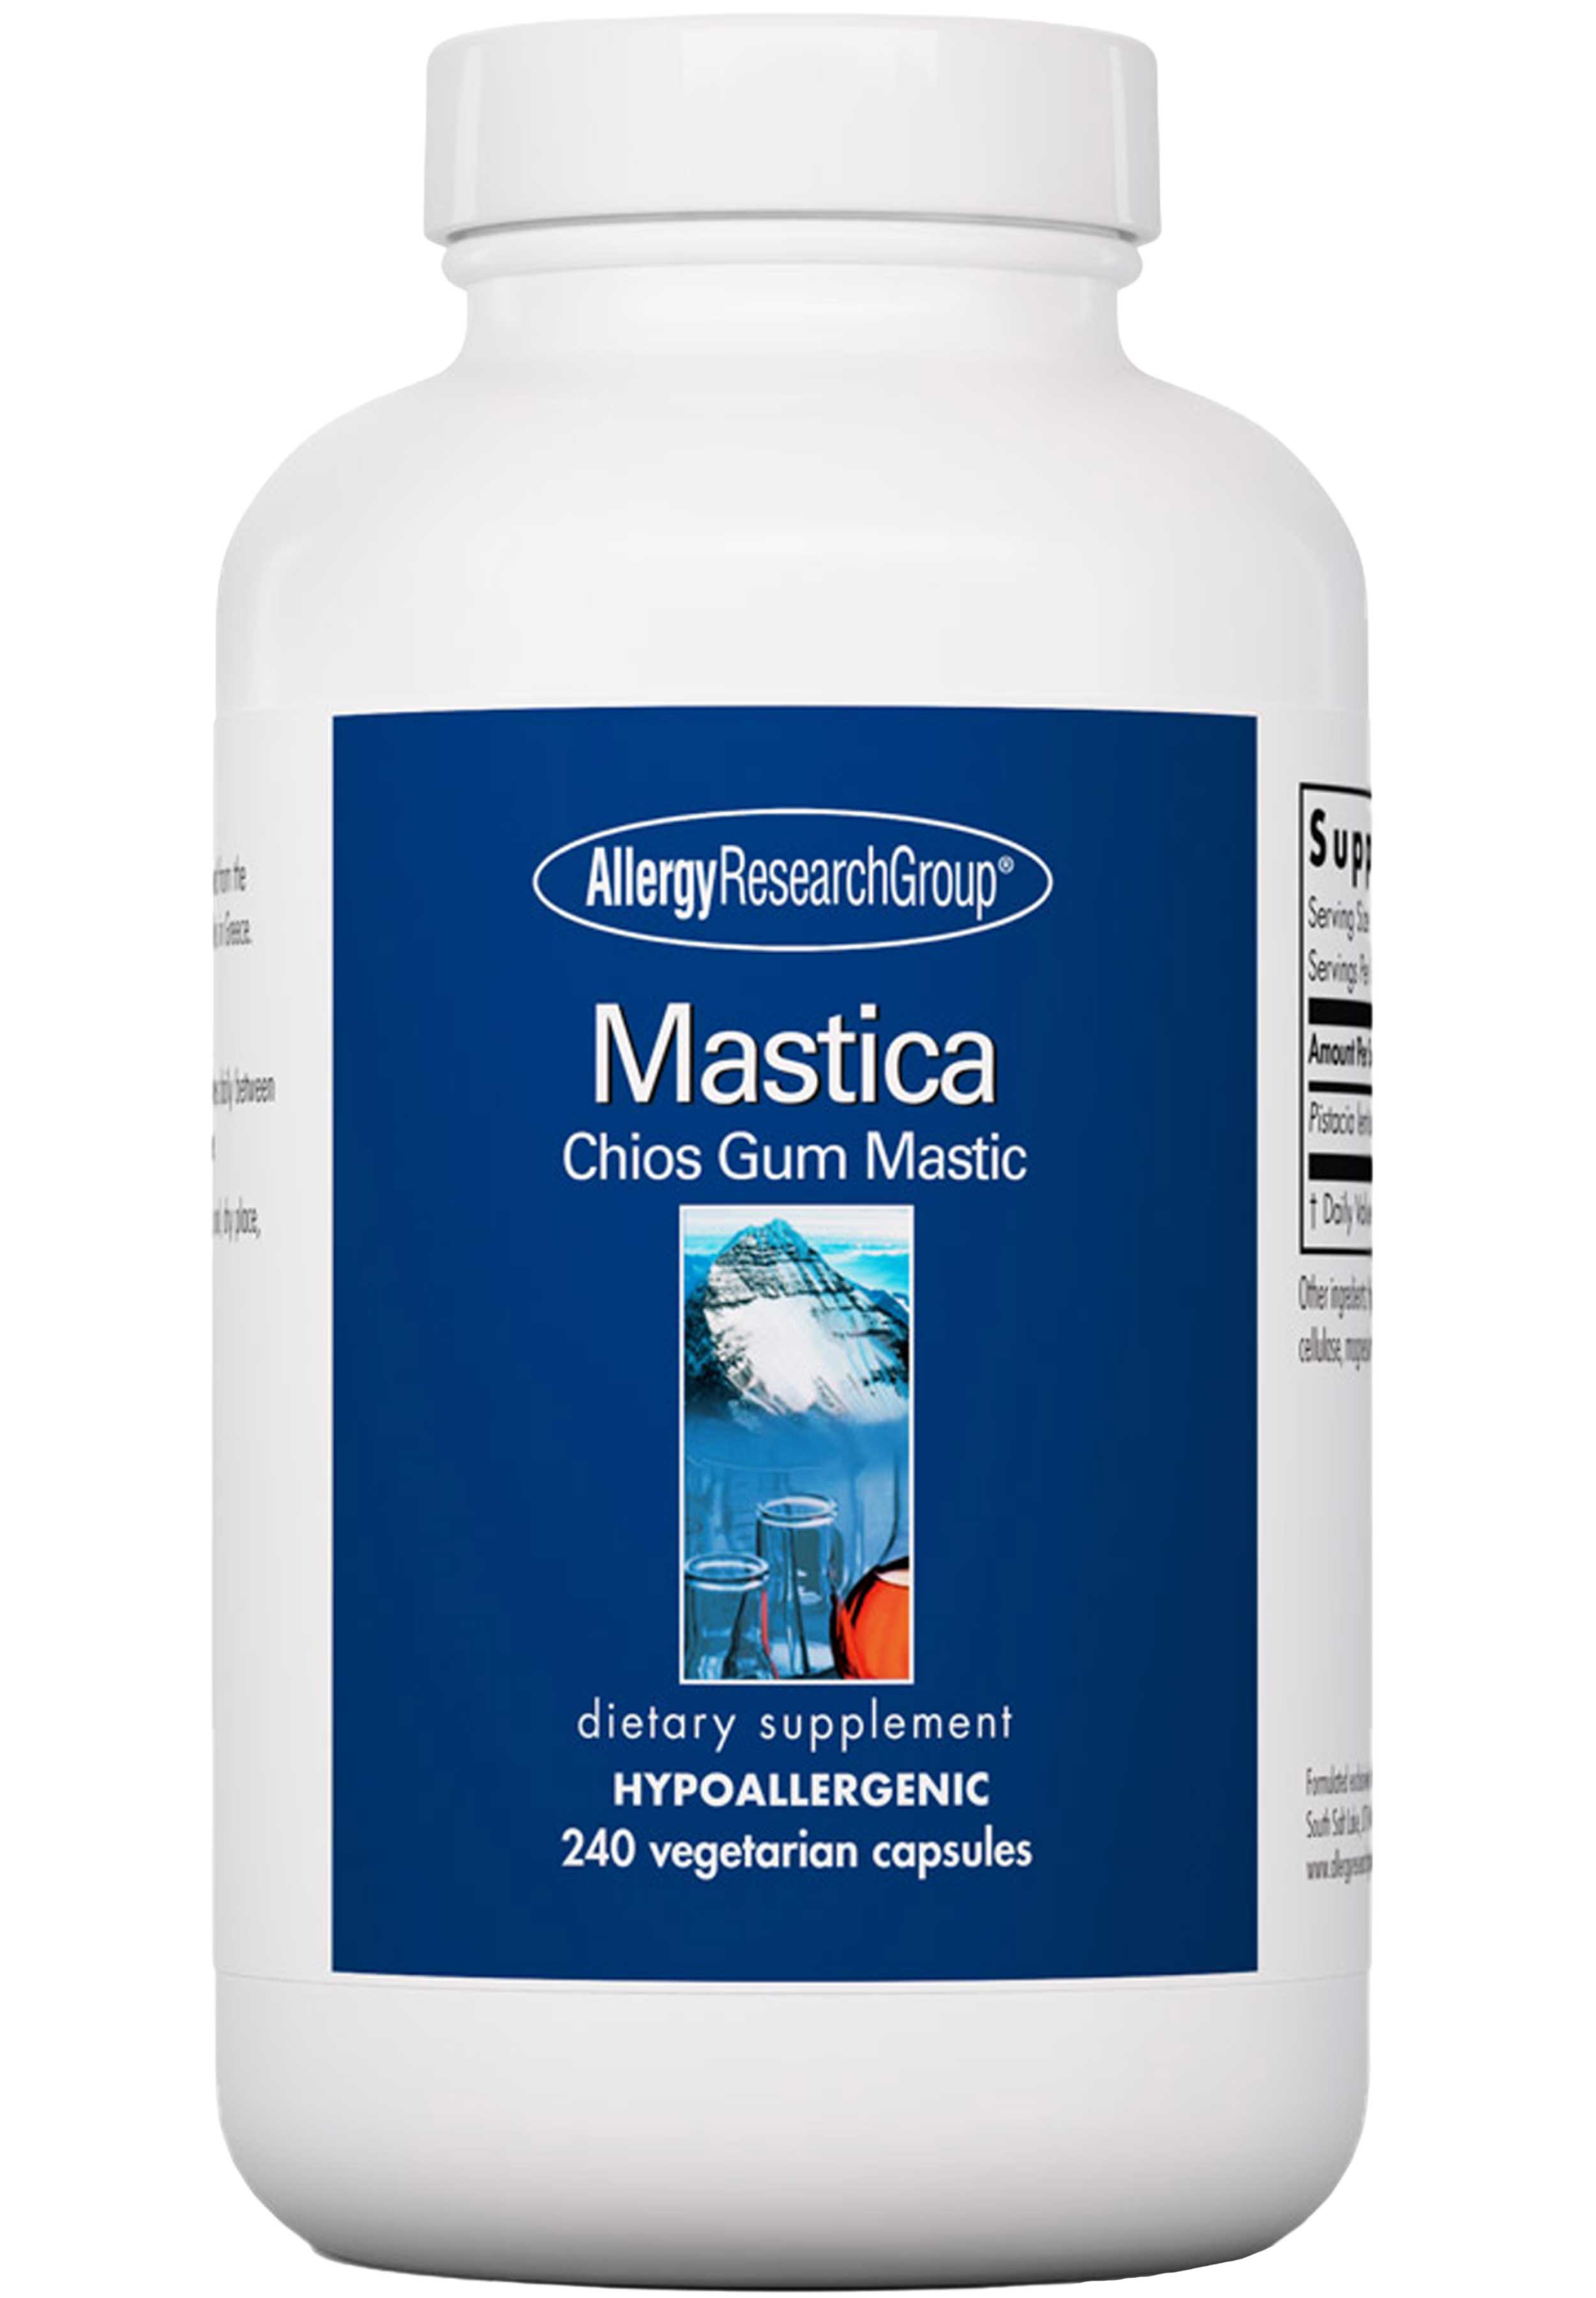 Allergy Research Group Mastica